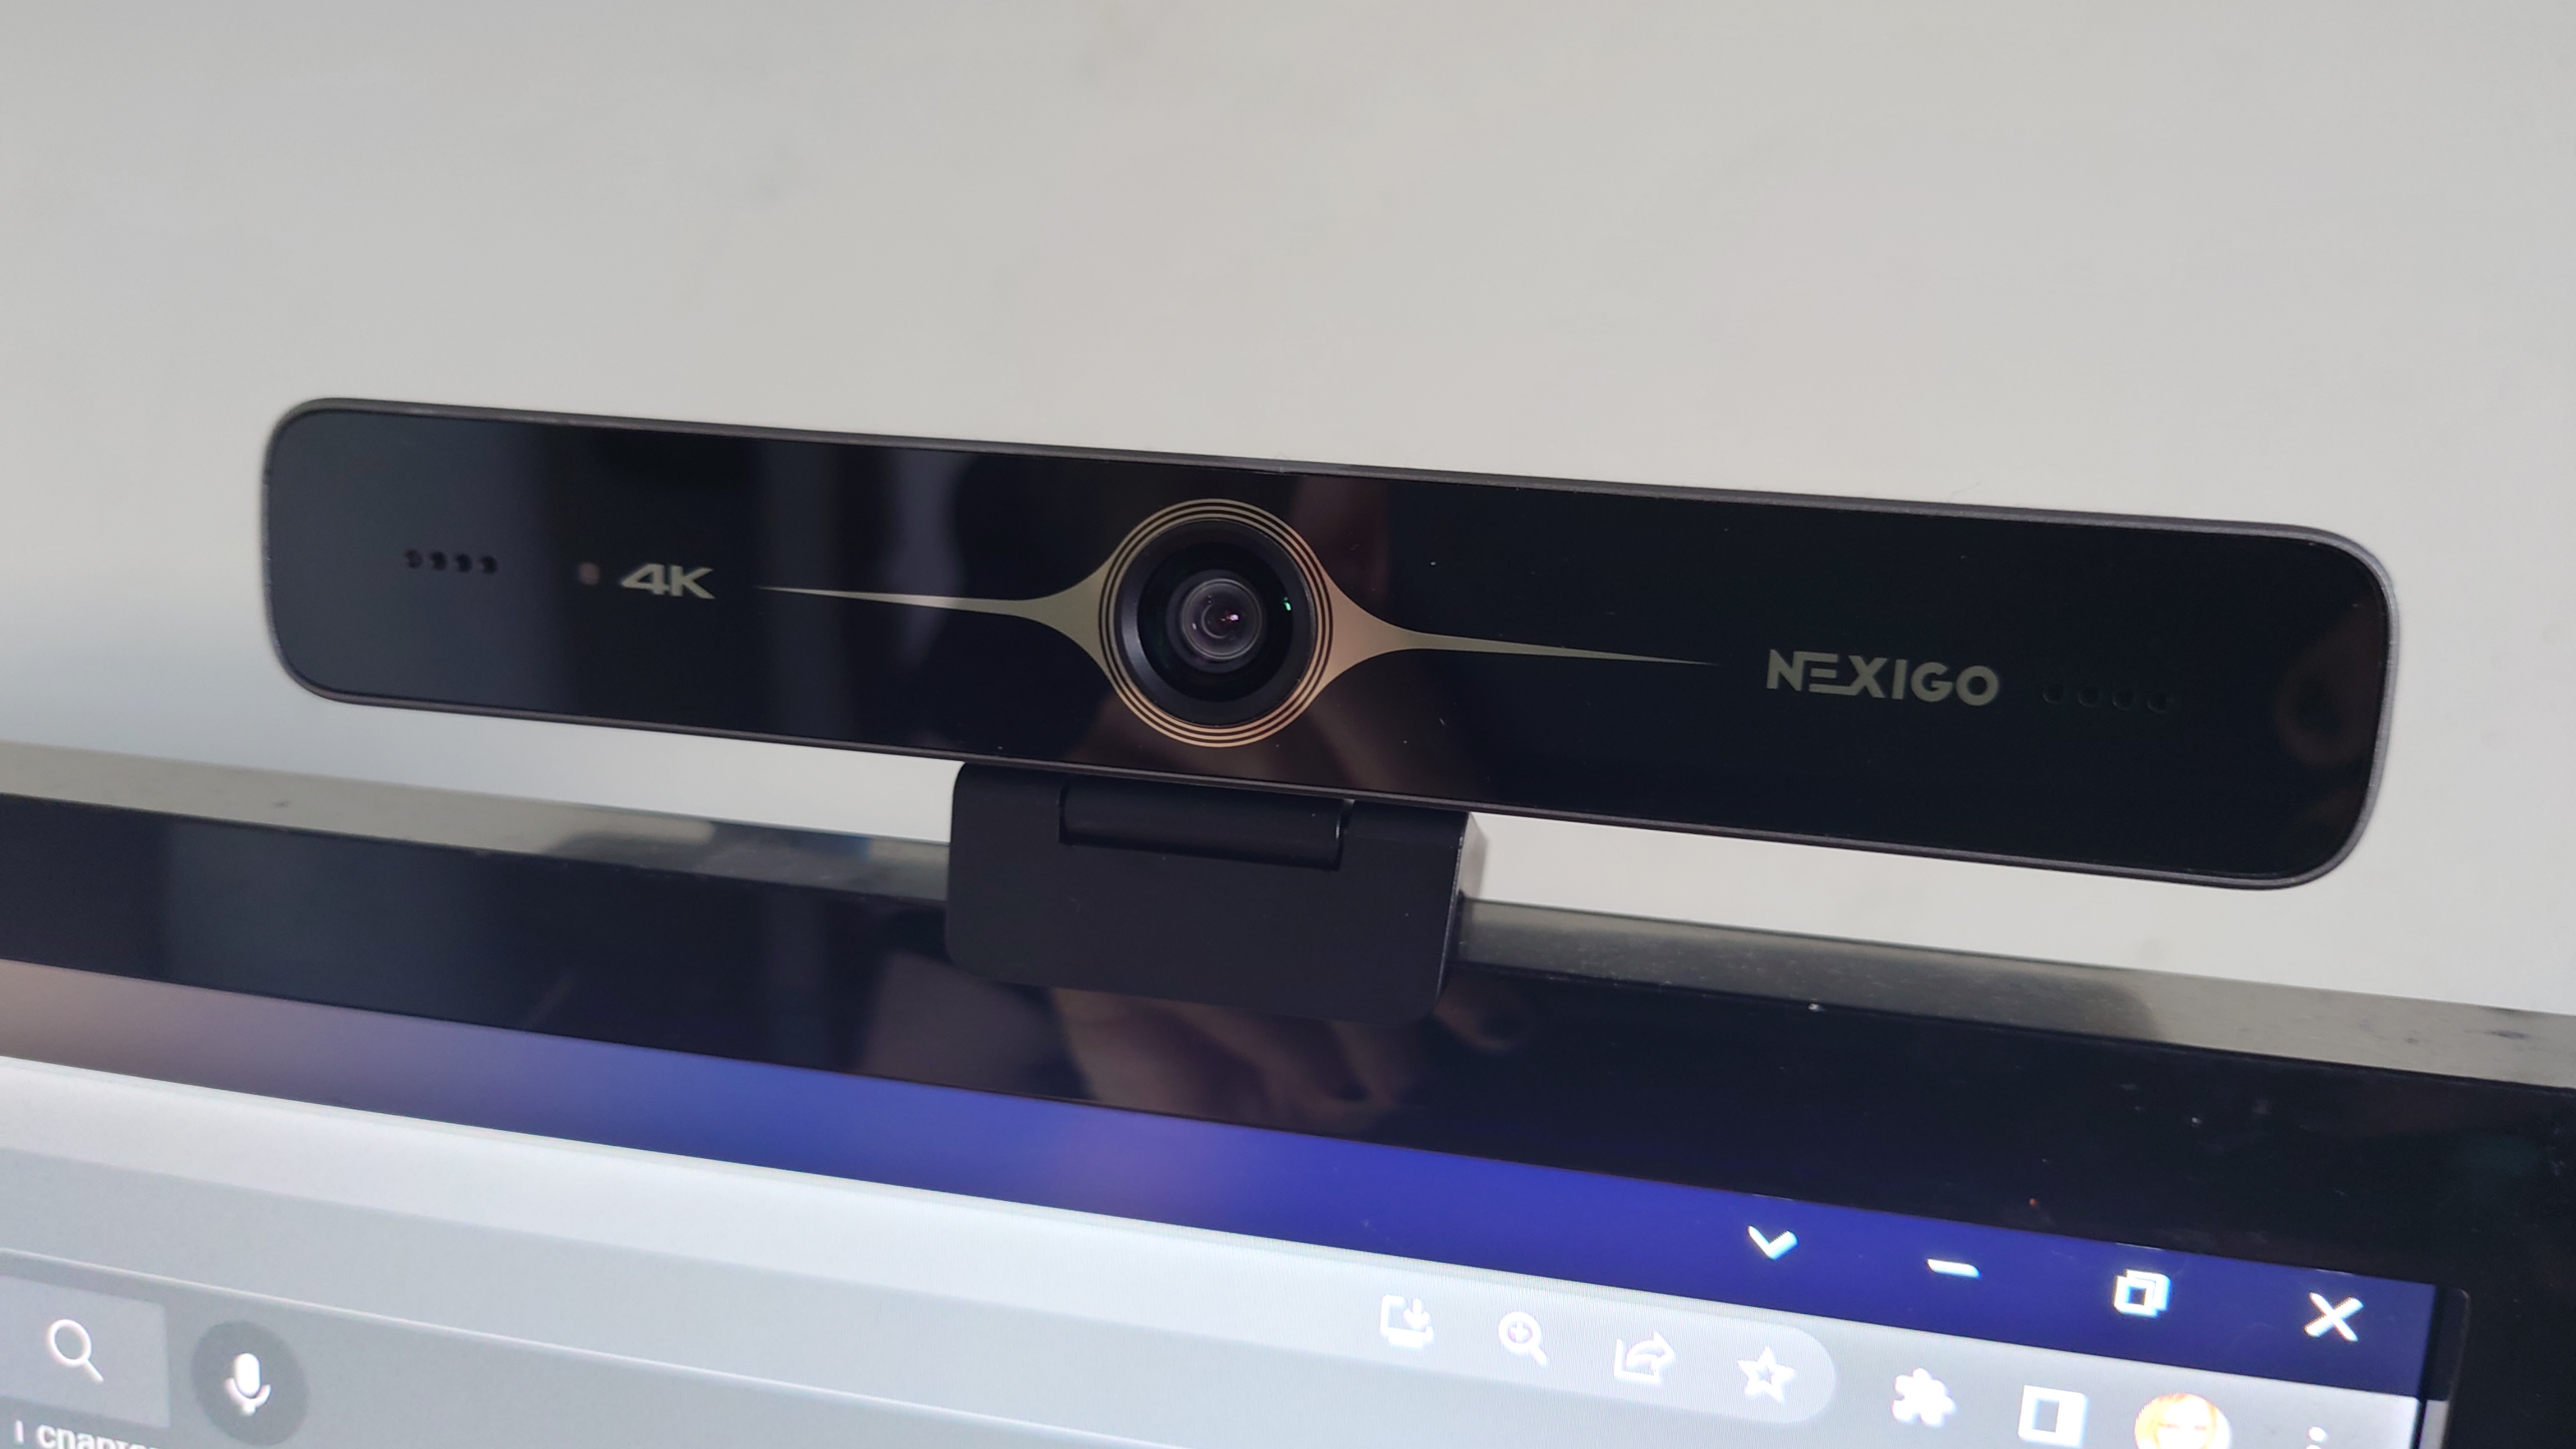 Trust Teza 4K Ultra HD Webcam: Hands on with an affordable 4K webcam